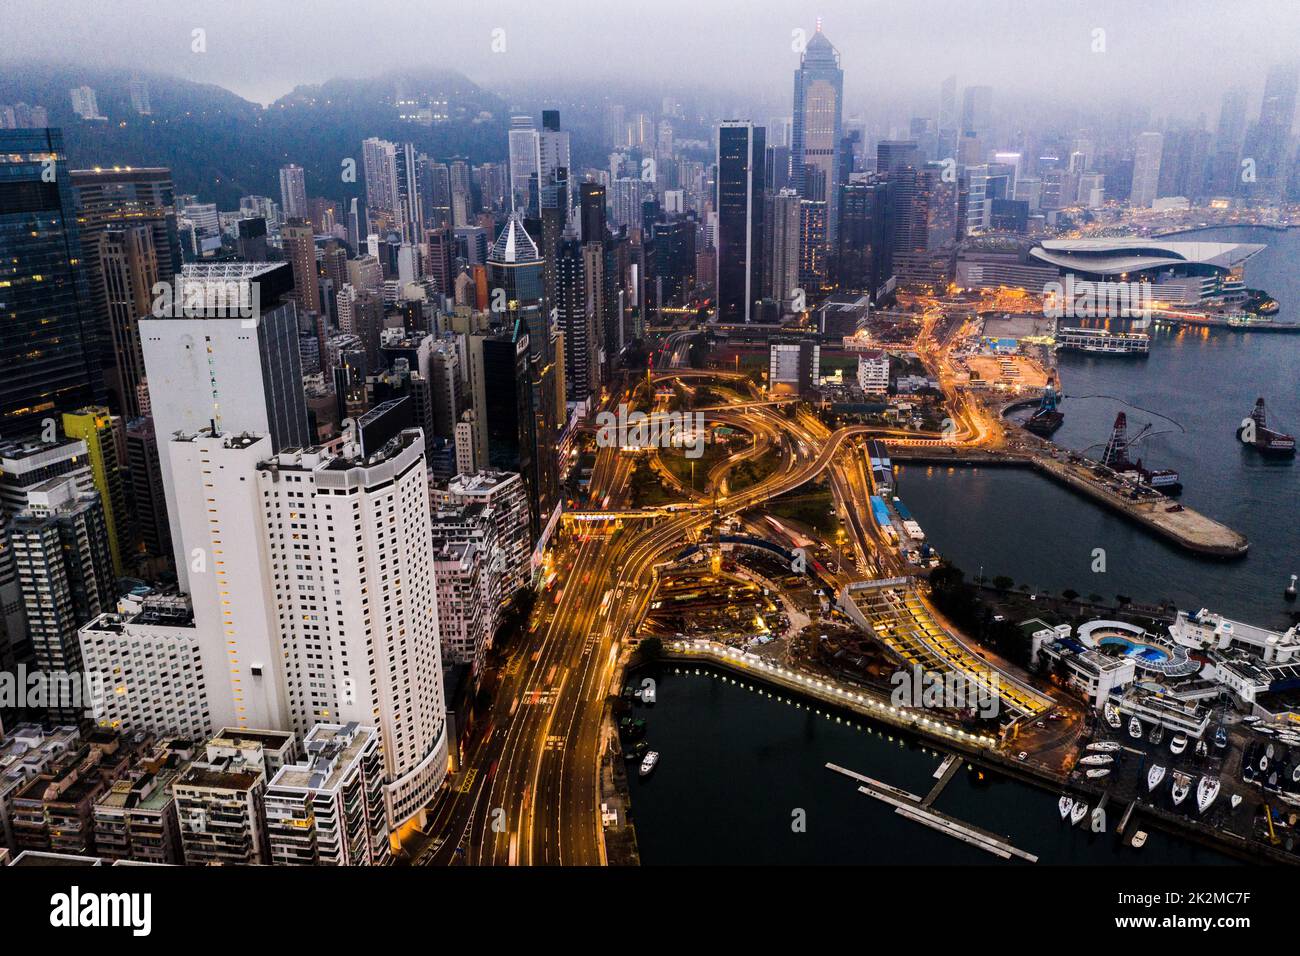 Youll fall in love with this city. Aerial shot of skyscrapers, office blocks and other commercial buildings in the urban metropolis of Hong Kong. Stock Photo